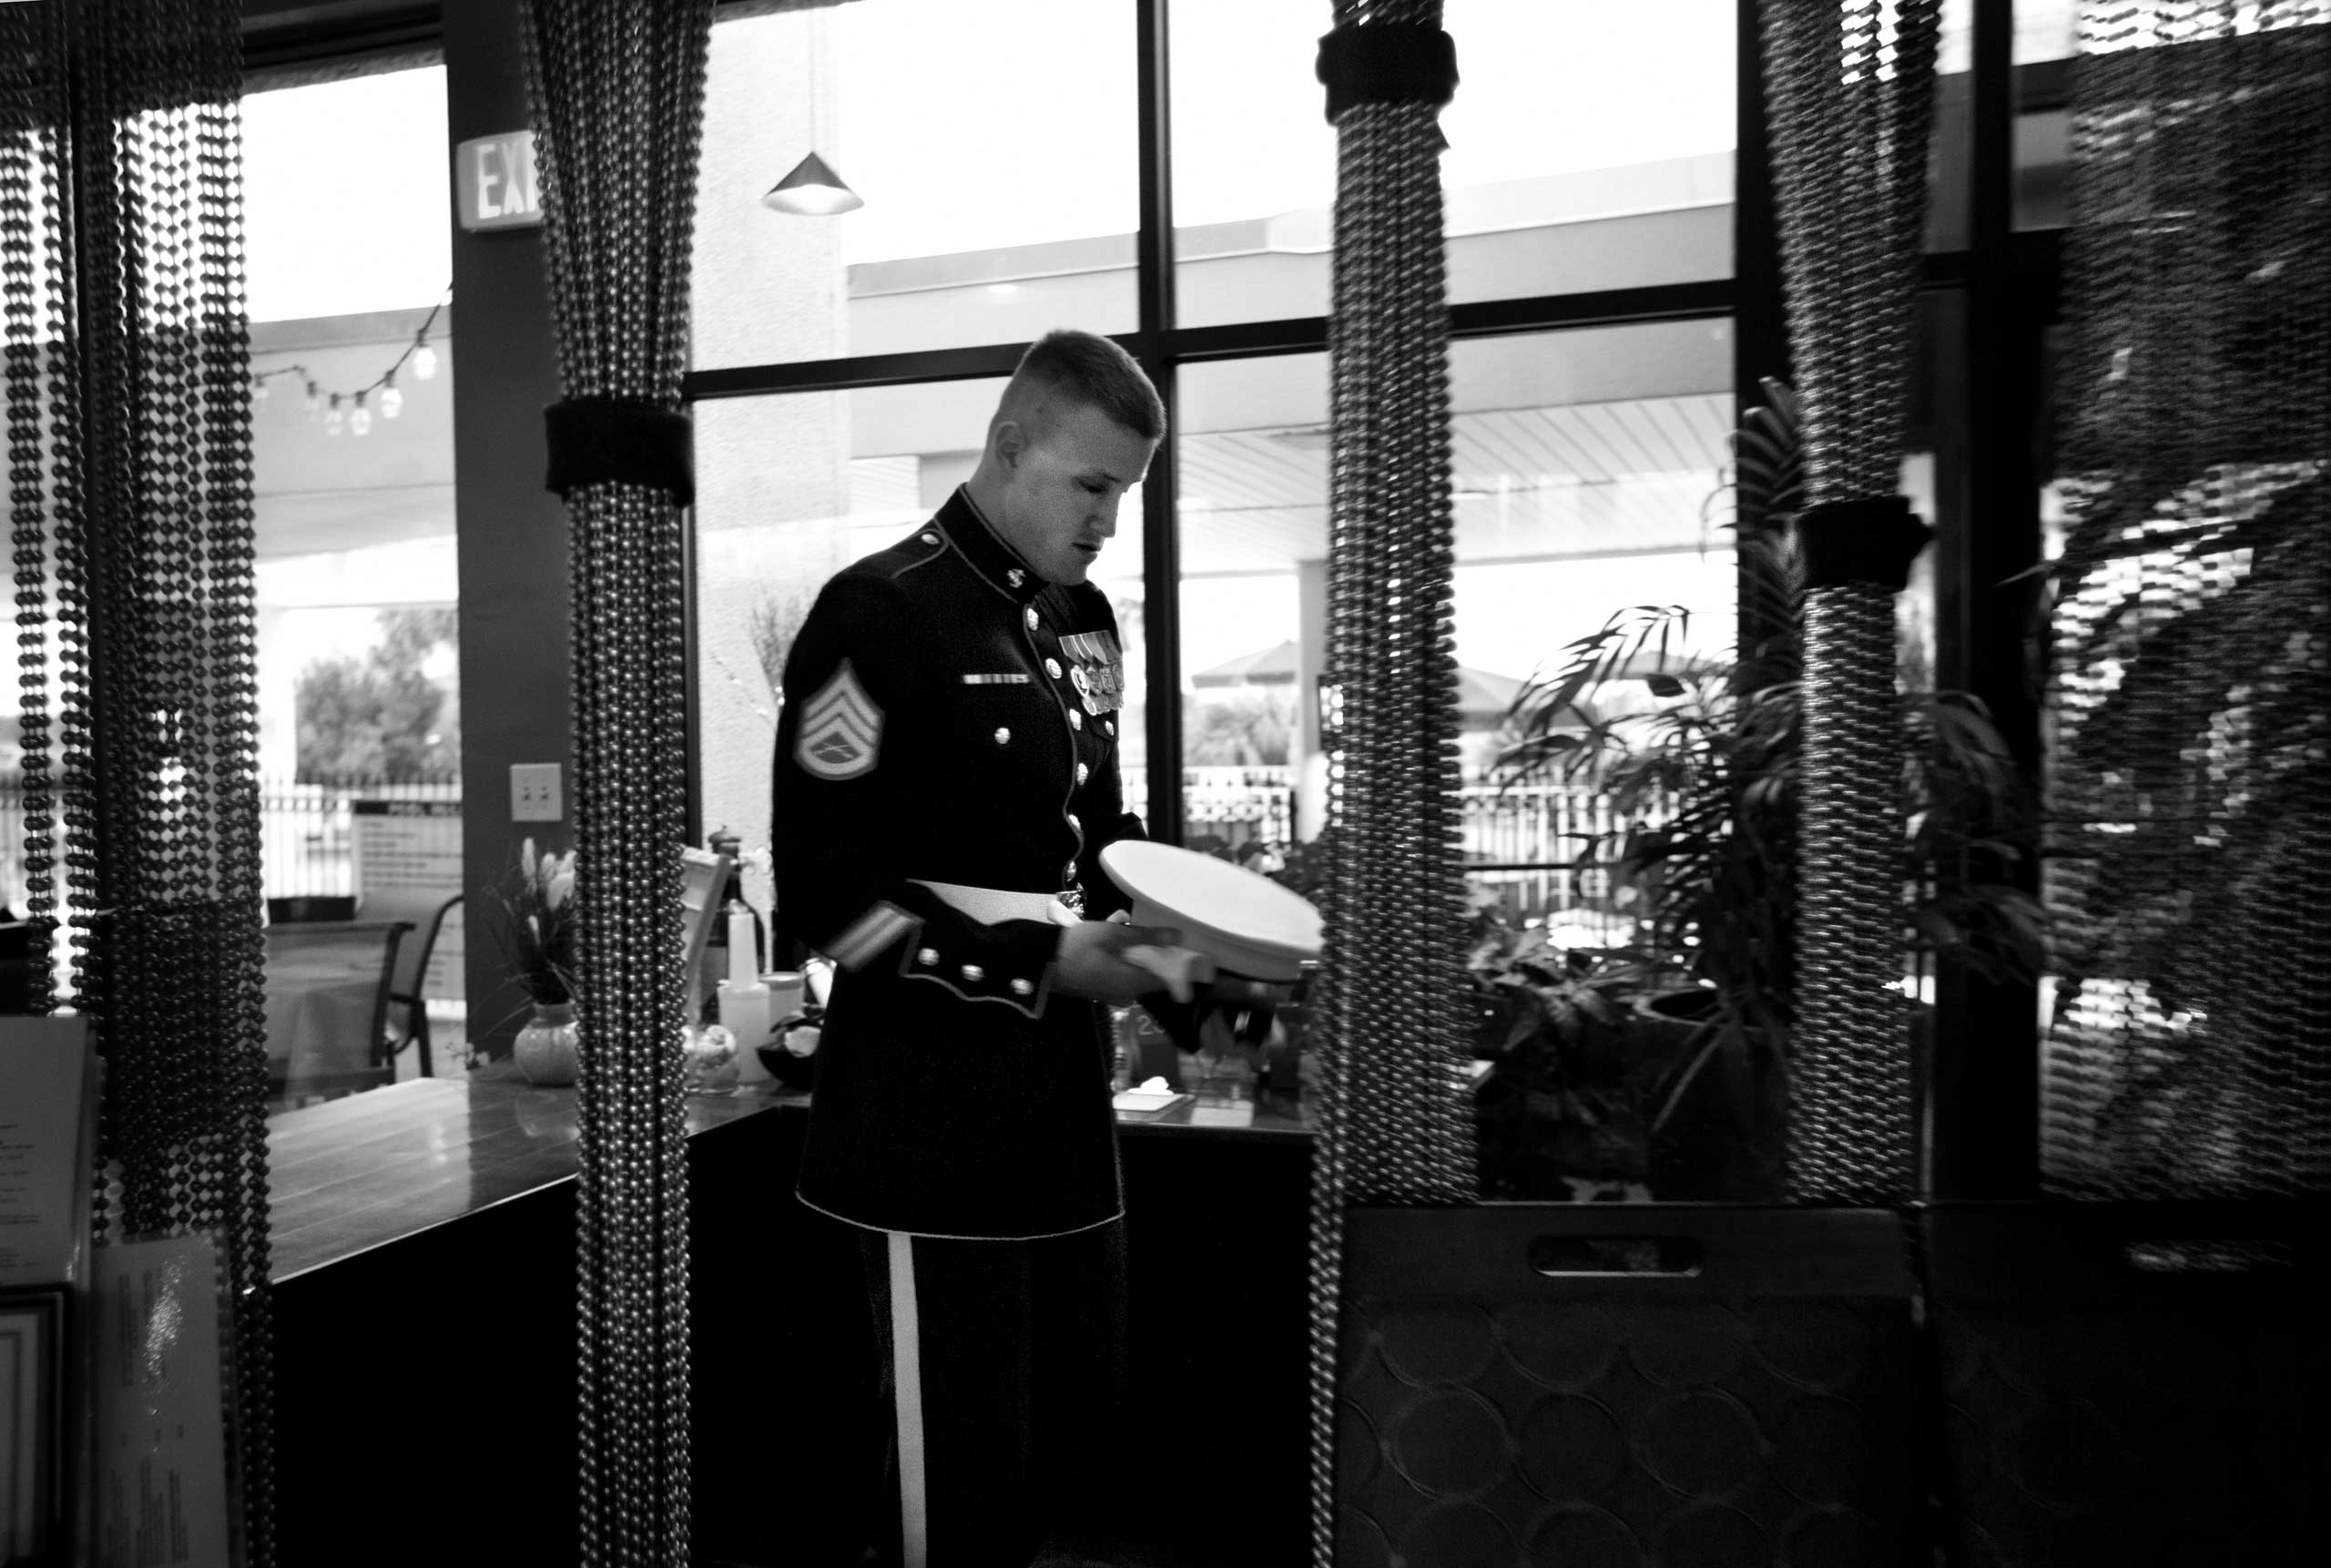 Staff Sergeant Jeremy Boutwell.
                              Stephanie Sinclair, Oct. 28, 2011. Camp Lejeune, N.C. 
                               Staff Sgt. Jeremy Boutwell, who served in the U.S. Marine Corps from 2003-2012, gets ready for the start of the 2011 U.S. Marine Corps Birthday Ball held especially for soldiers from the Wounded Warrior Battalion-East regiment. Boutwell was severely wounded with brain and eye injuries in an attack during a routine patrol in Iraq’s Anbar province in March 2004. With most of his family in the service, he was very reluctant to leave the USMC, even with his injuries. 'Being in the Marines is all I ever wanted to do, from the time I was 5 years old. I wish I could continue but my injuries continue to slow me down,' he said. 'I believe in what we do for our nation.'
                              I chose this photograph because I spent most of my time covering the civilians caught in the crossfire during my years of covering conflict in the Middle East. However, upon my return home to the U.S. after being based abroad, I learned that the wounds from the wars we engage in as a country run very deep, even for the soldiers involved. Some have more pronounced physical injuries other wounds are psychological. But I am amazed and humbled with the human spirit's ability to heal, no matter whose side of a conflict one is on. I was grateful that night to attend the ball. Marines who fought for us, and were gravely injured on our behalf, had a moment to be joyous with their loved ones. It was a night I will never forget.